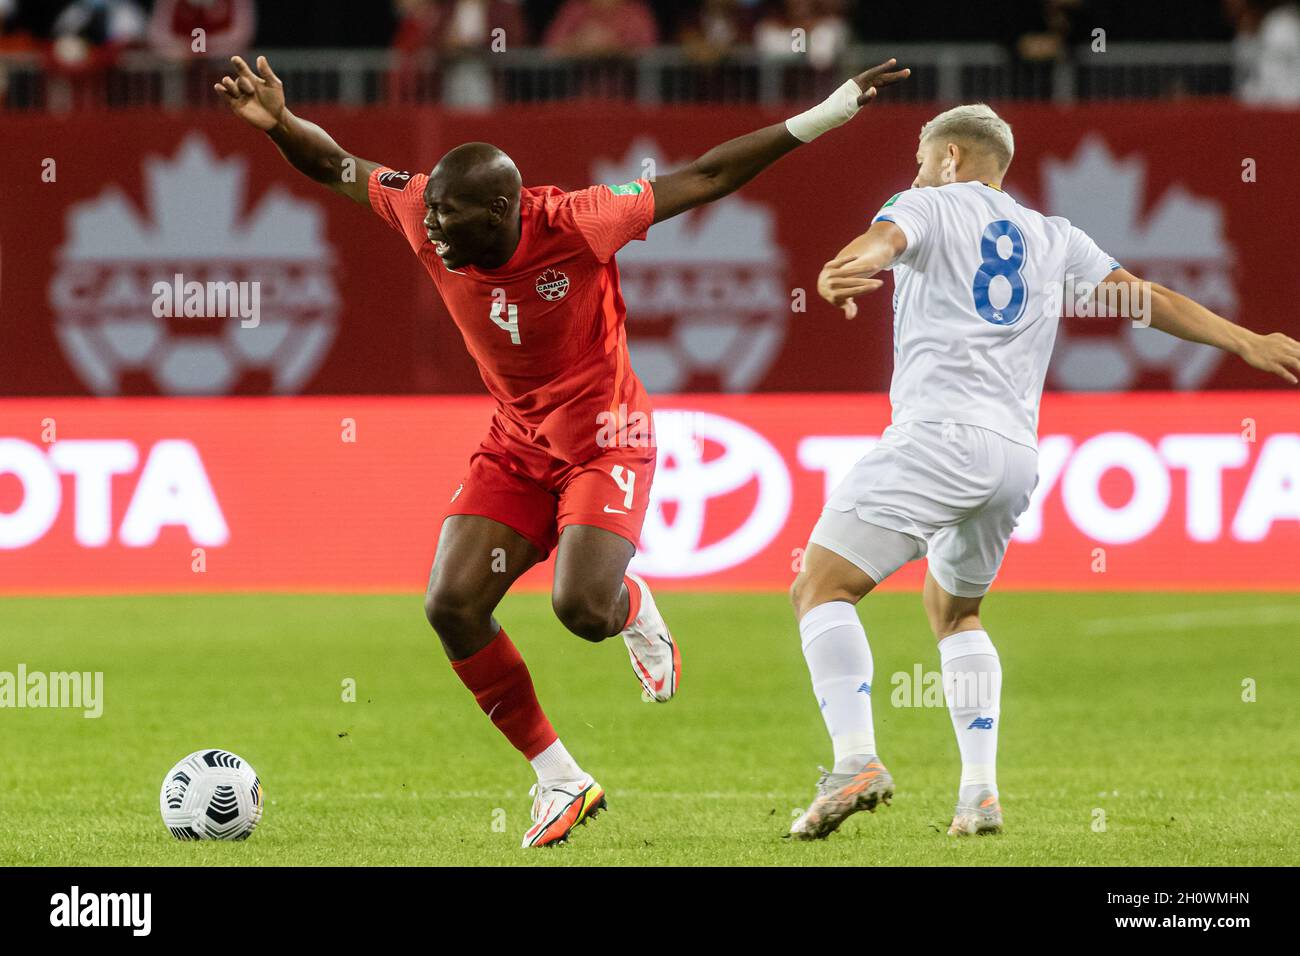 Toronto, Canada, October 13, 2021: Kamal Miller, No.4, of Team Canada in action against Cristian Martínez, No.8, of Team Panama during the CONCACAF FIFA World Cup Qualifying 2022 match at BMO Field in Toronto, Canada. Canada won the match 4-1. Credit: Phamai Techaphan/Alamy Live News Stock Photo